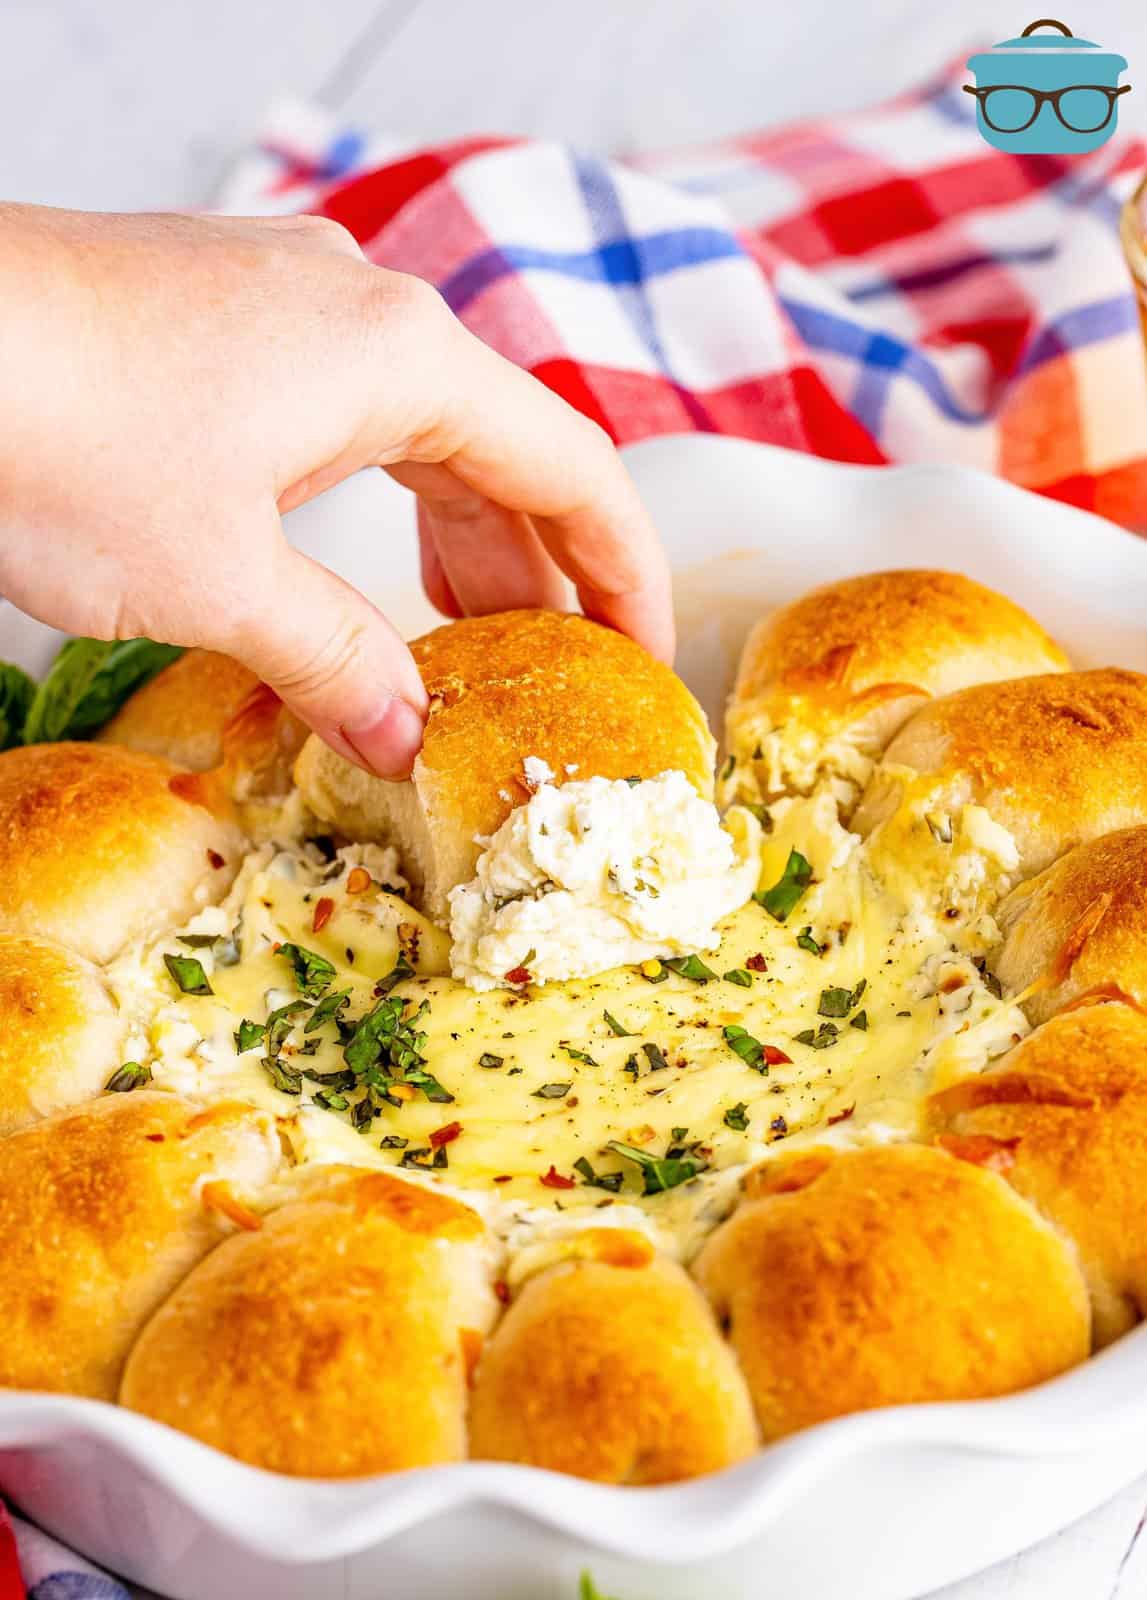 a hand dipping pizza bread ball into the center of the pie dish with the white cheese dip.